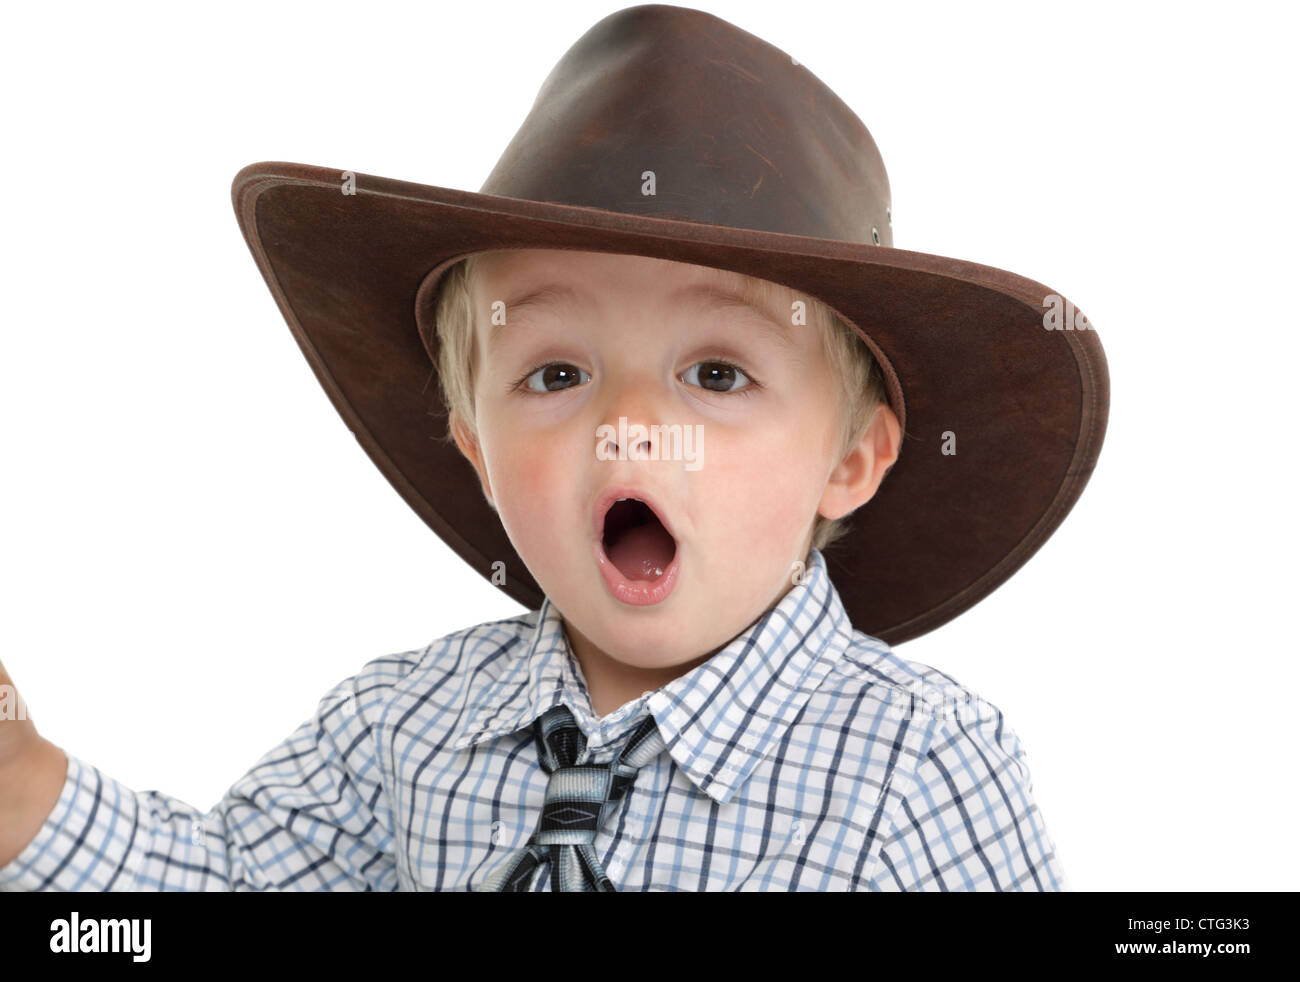 Look of surprise or shock on a toddlers face Stock Photo